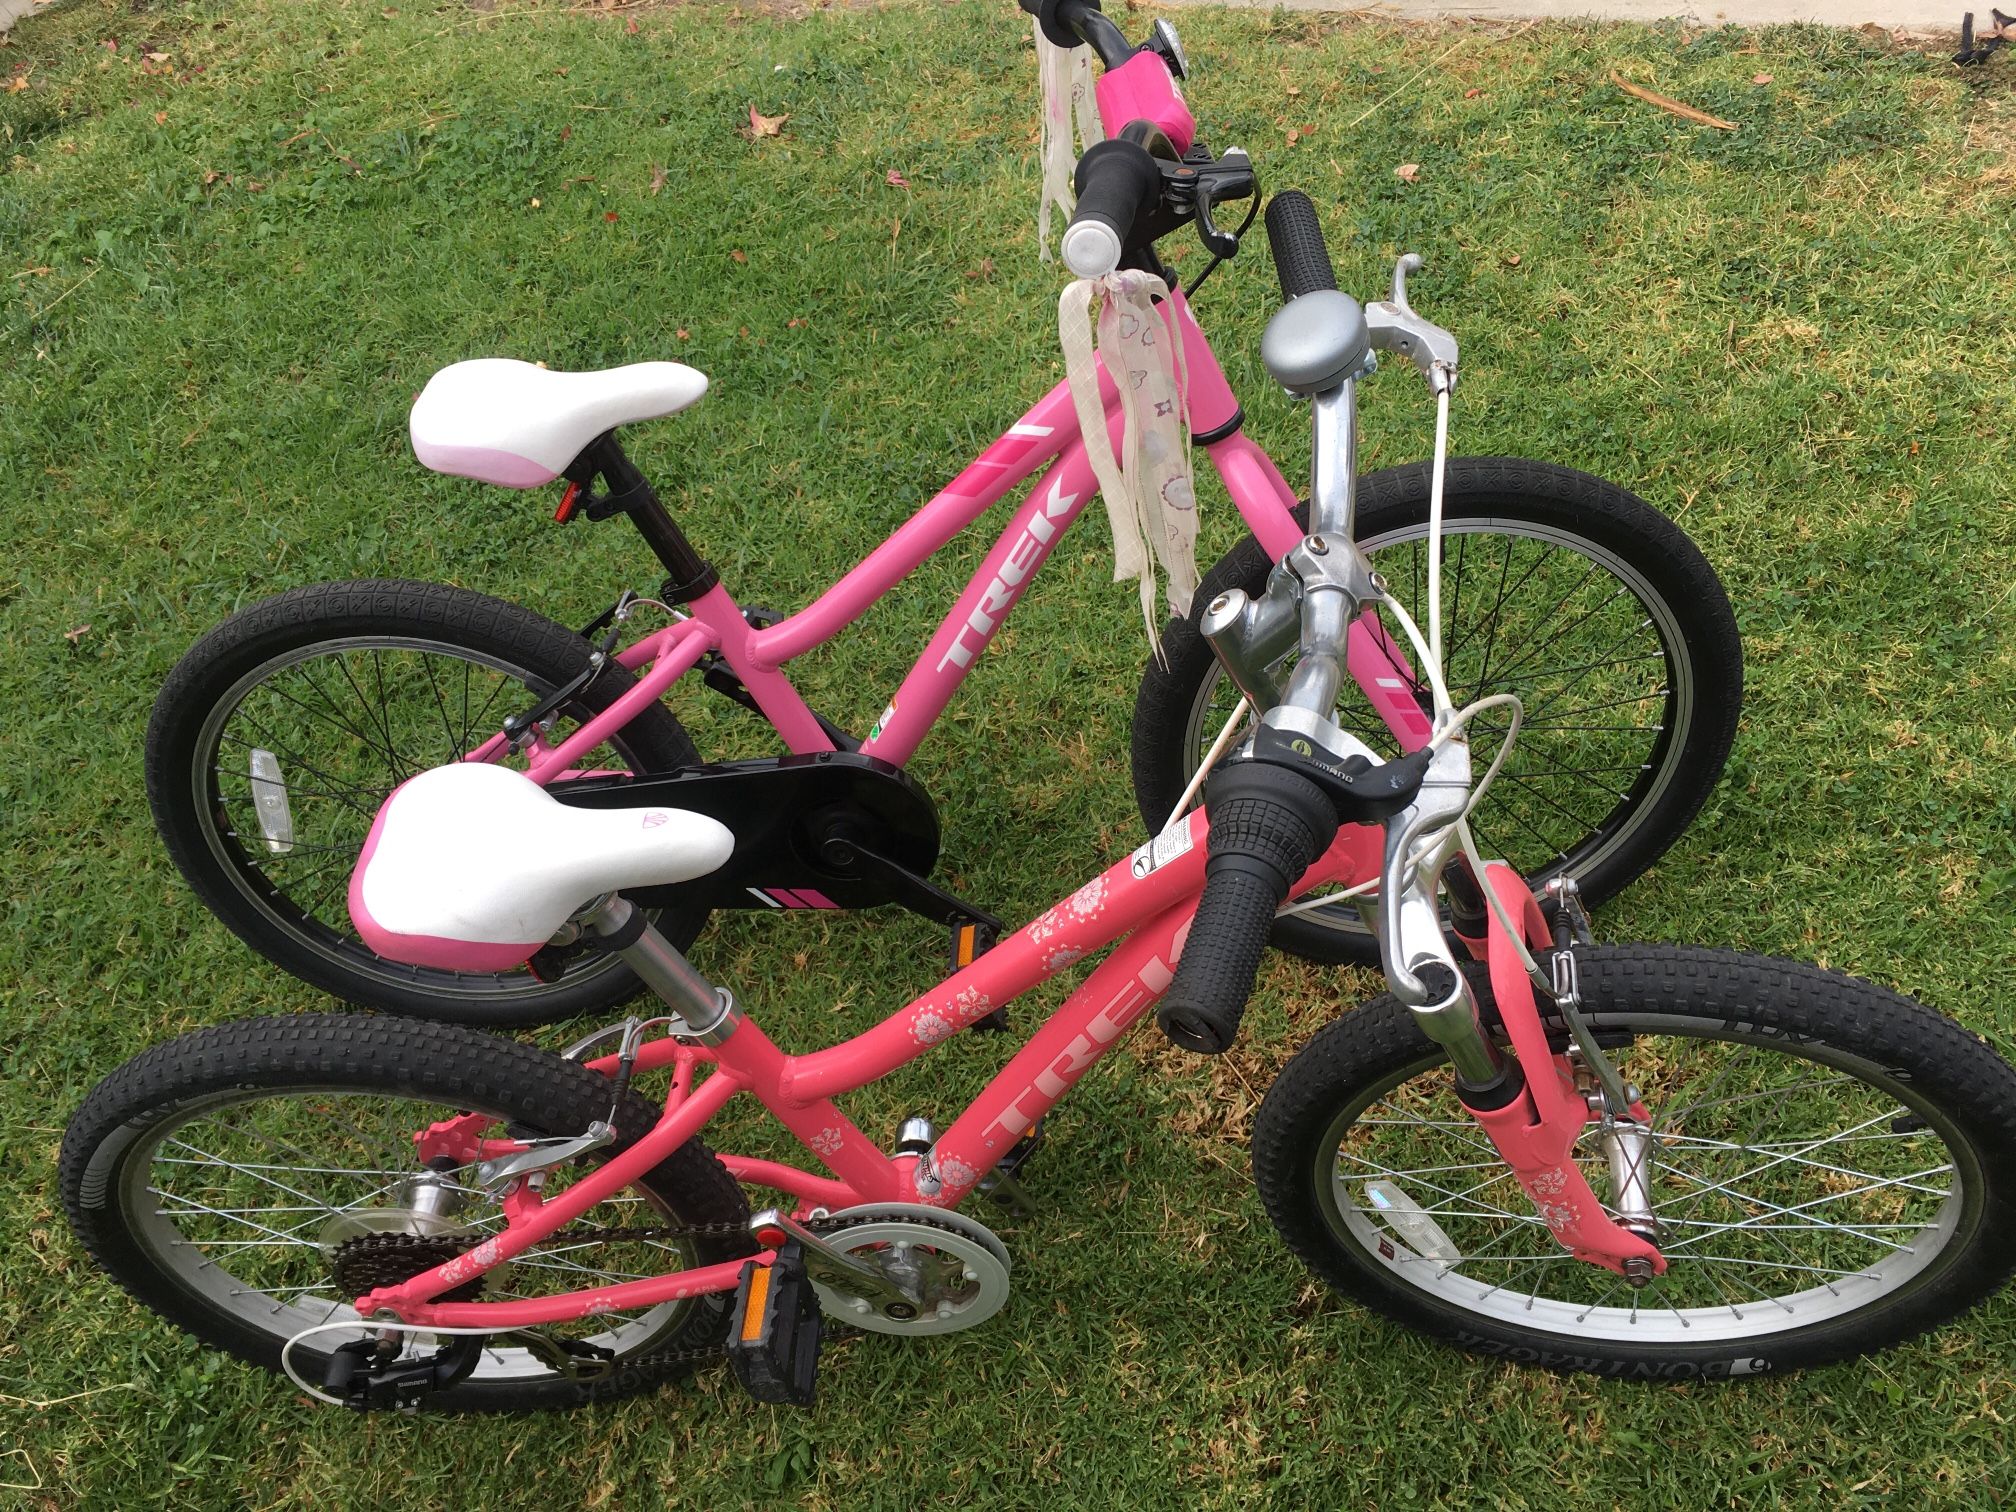 Trek Precaliber 20 MT60 Kids Girl's Mountain Bike 20” wheels on 10” frame  (STILL AVAILABLE) Precaliber is a single speed with hand and foot brakes $1